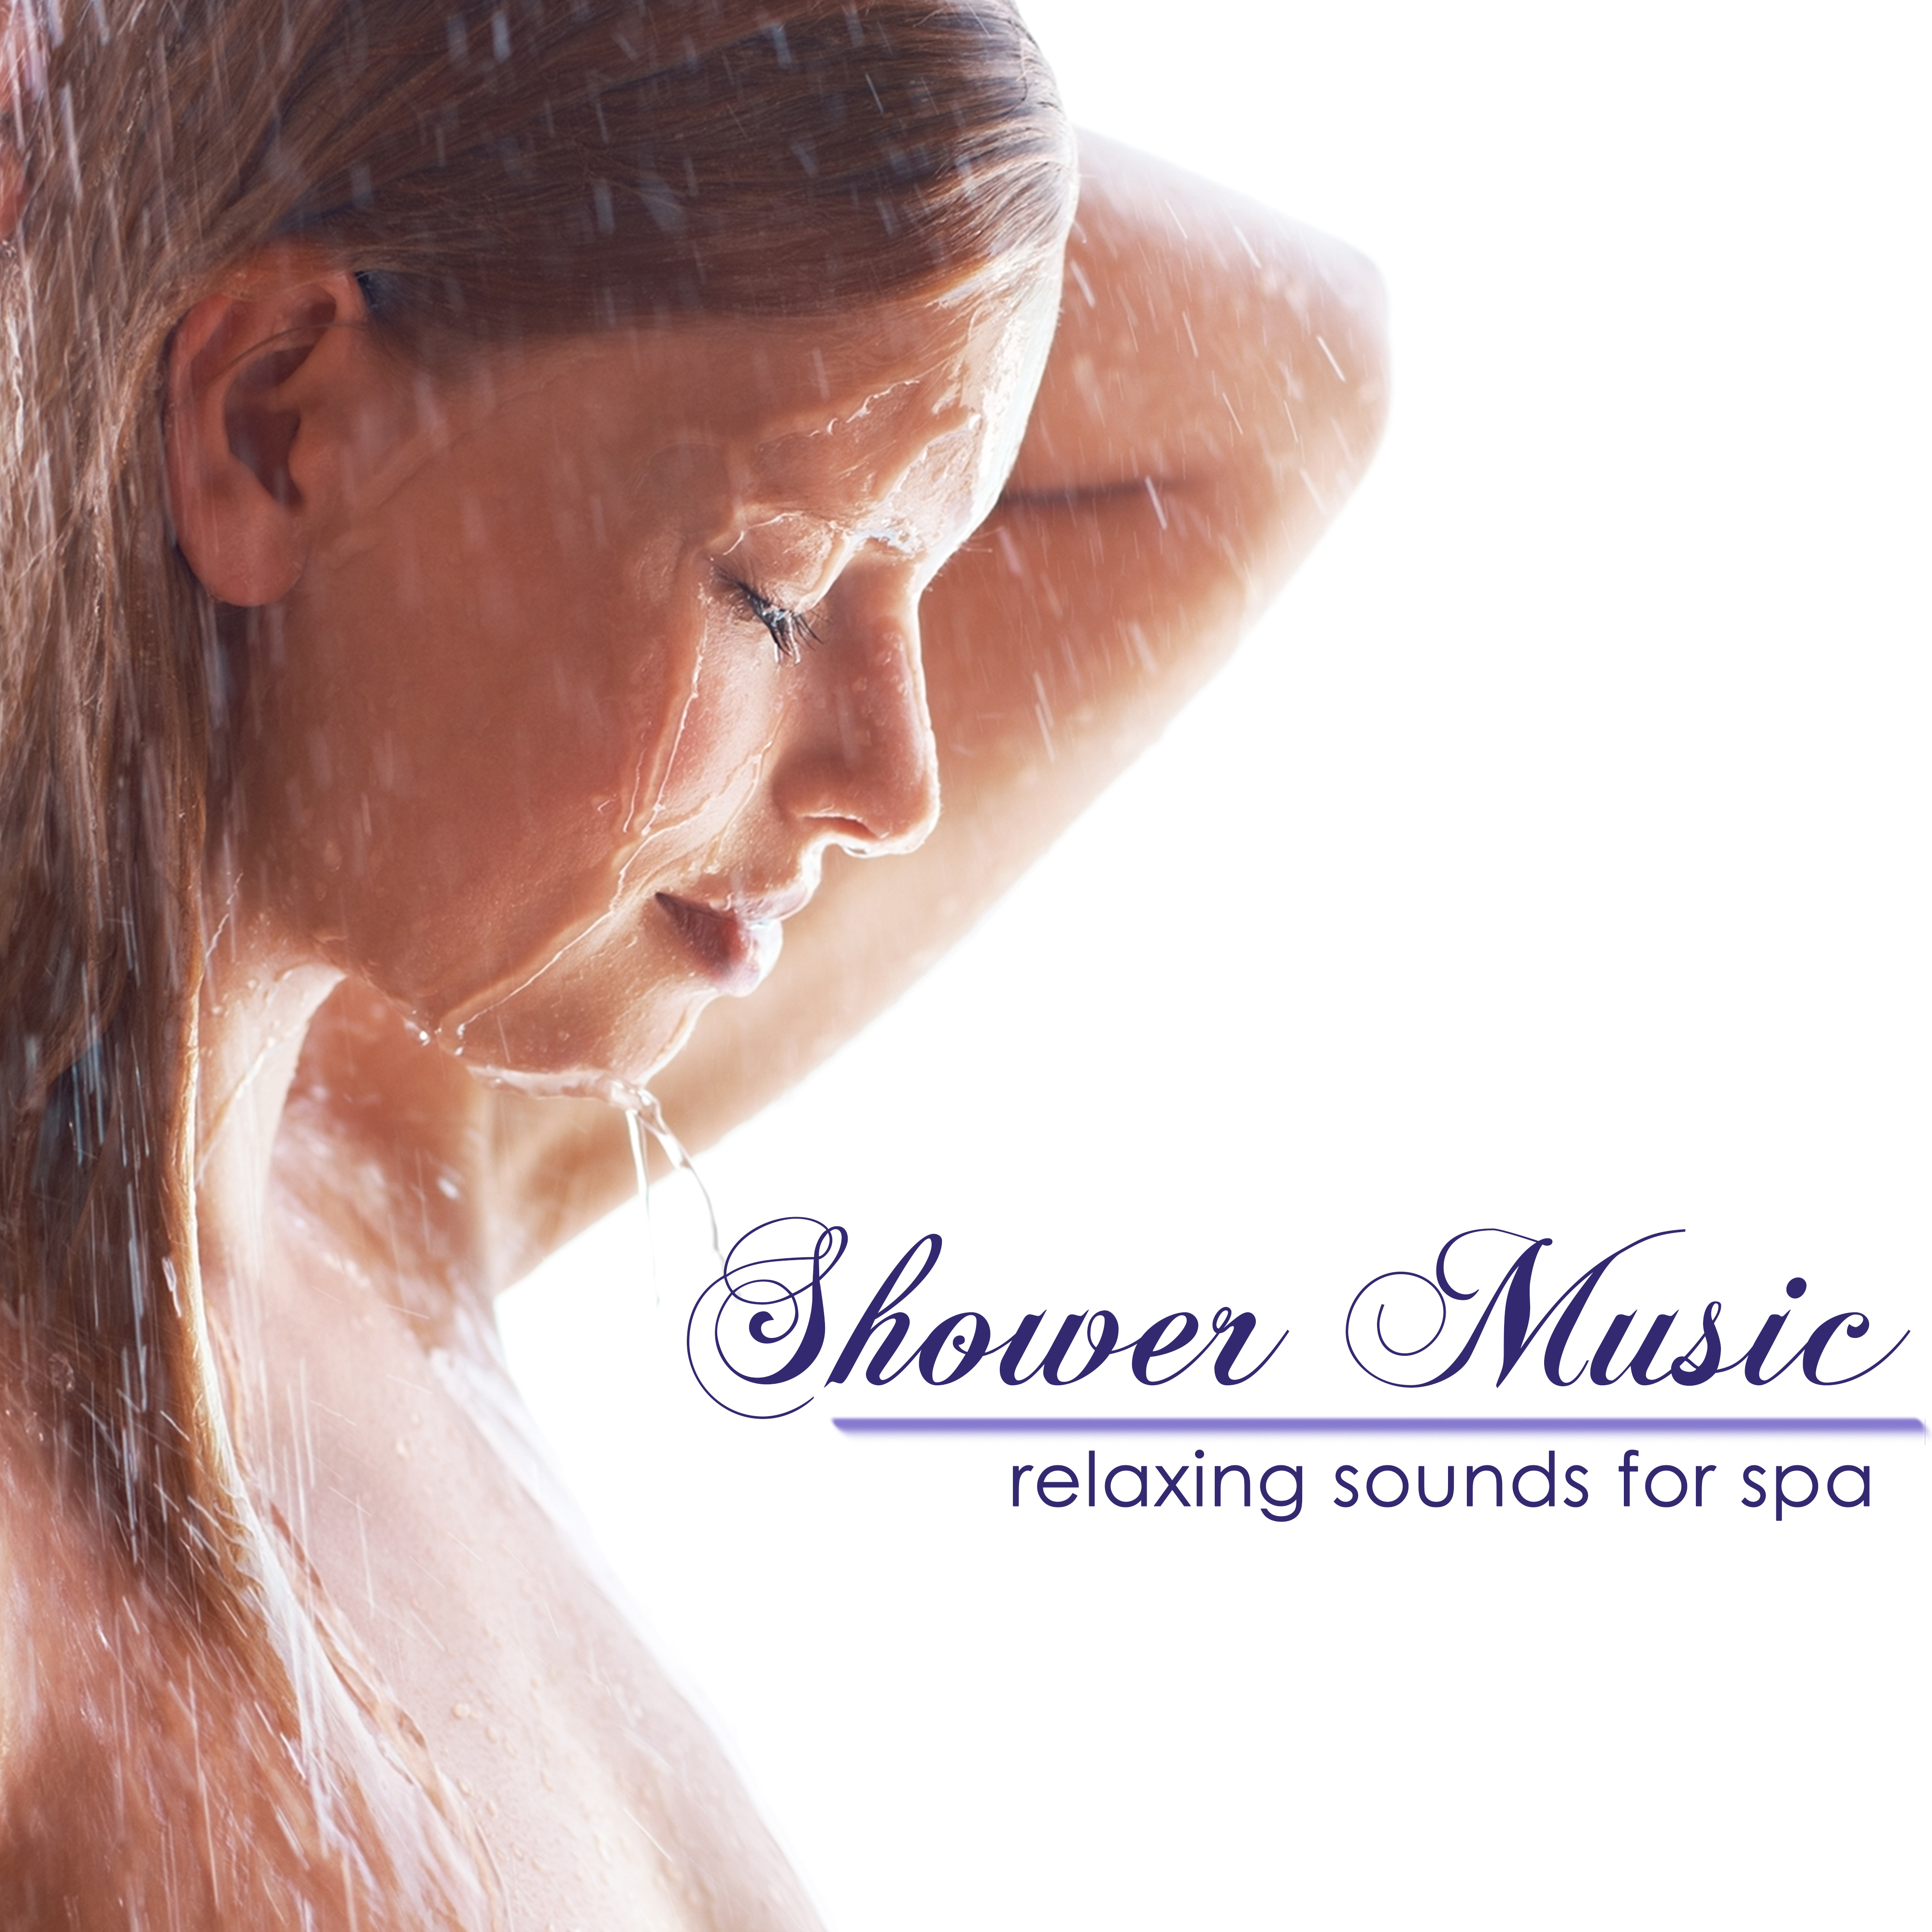 Shower Music – Relaxing Sounds for Spa, Easy Listening Music for Self Care